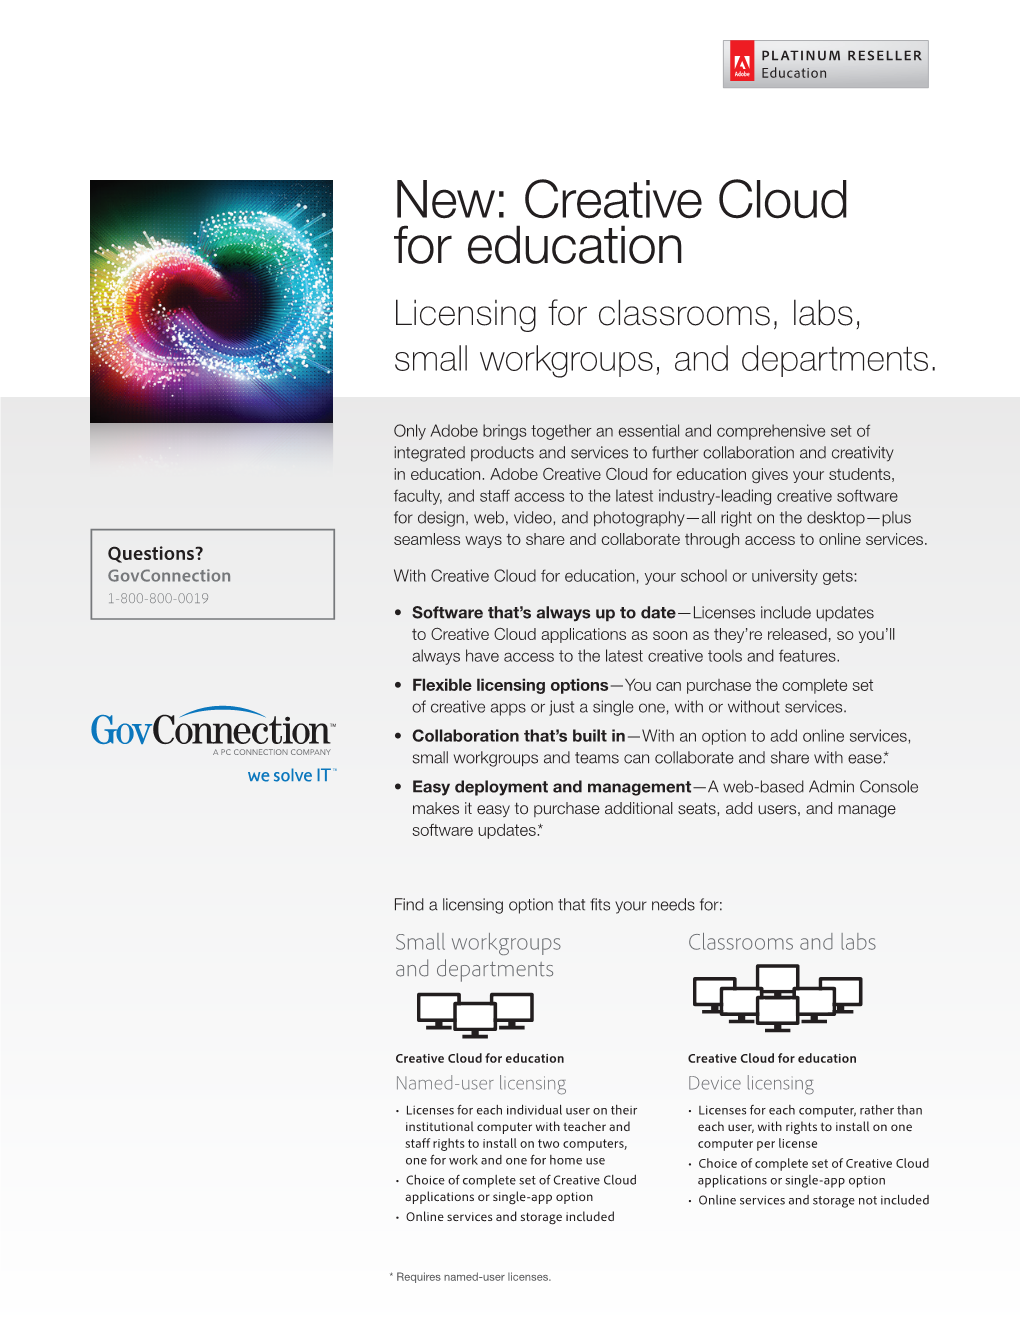 Creative Cloud for Education Licensing for Classrooms, Labs, Small Workgroups, and Departments